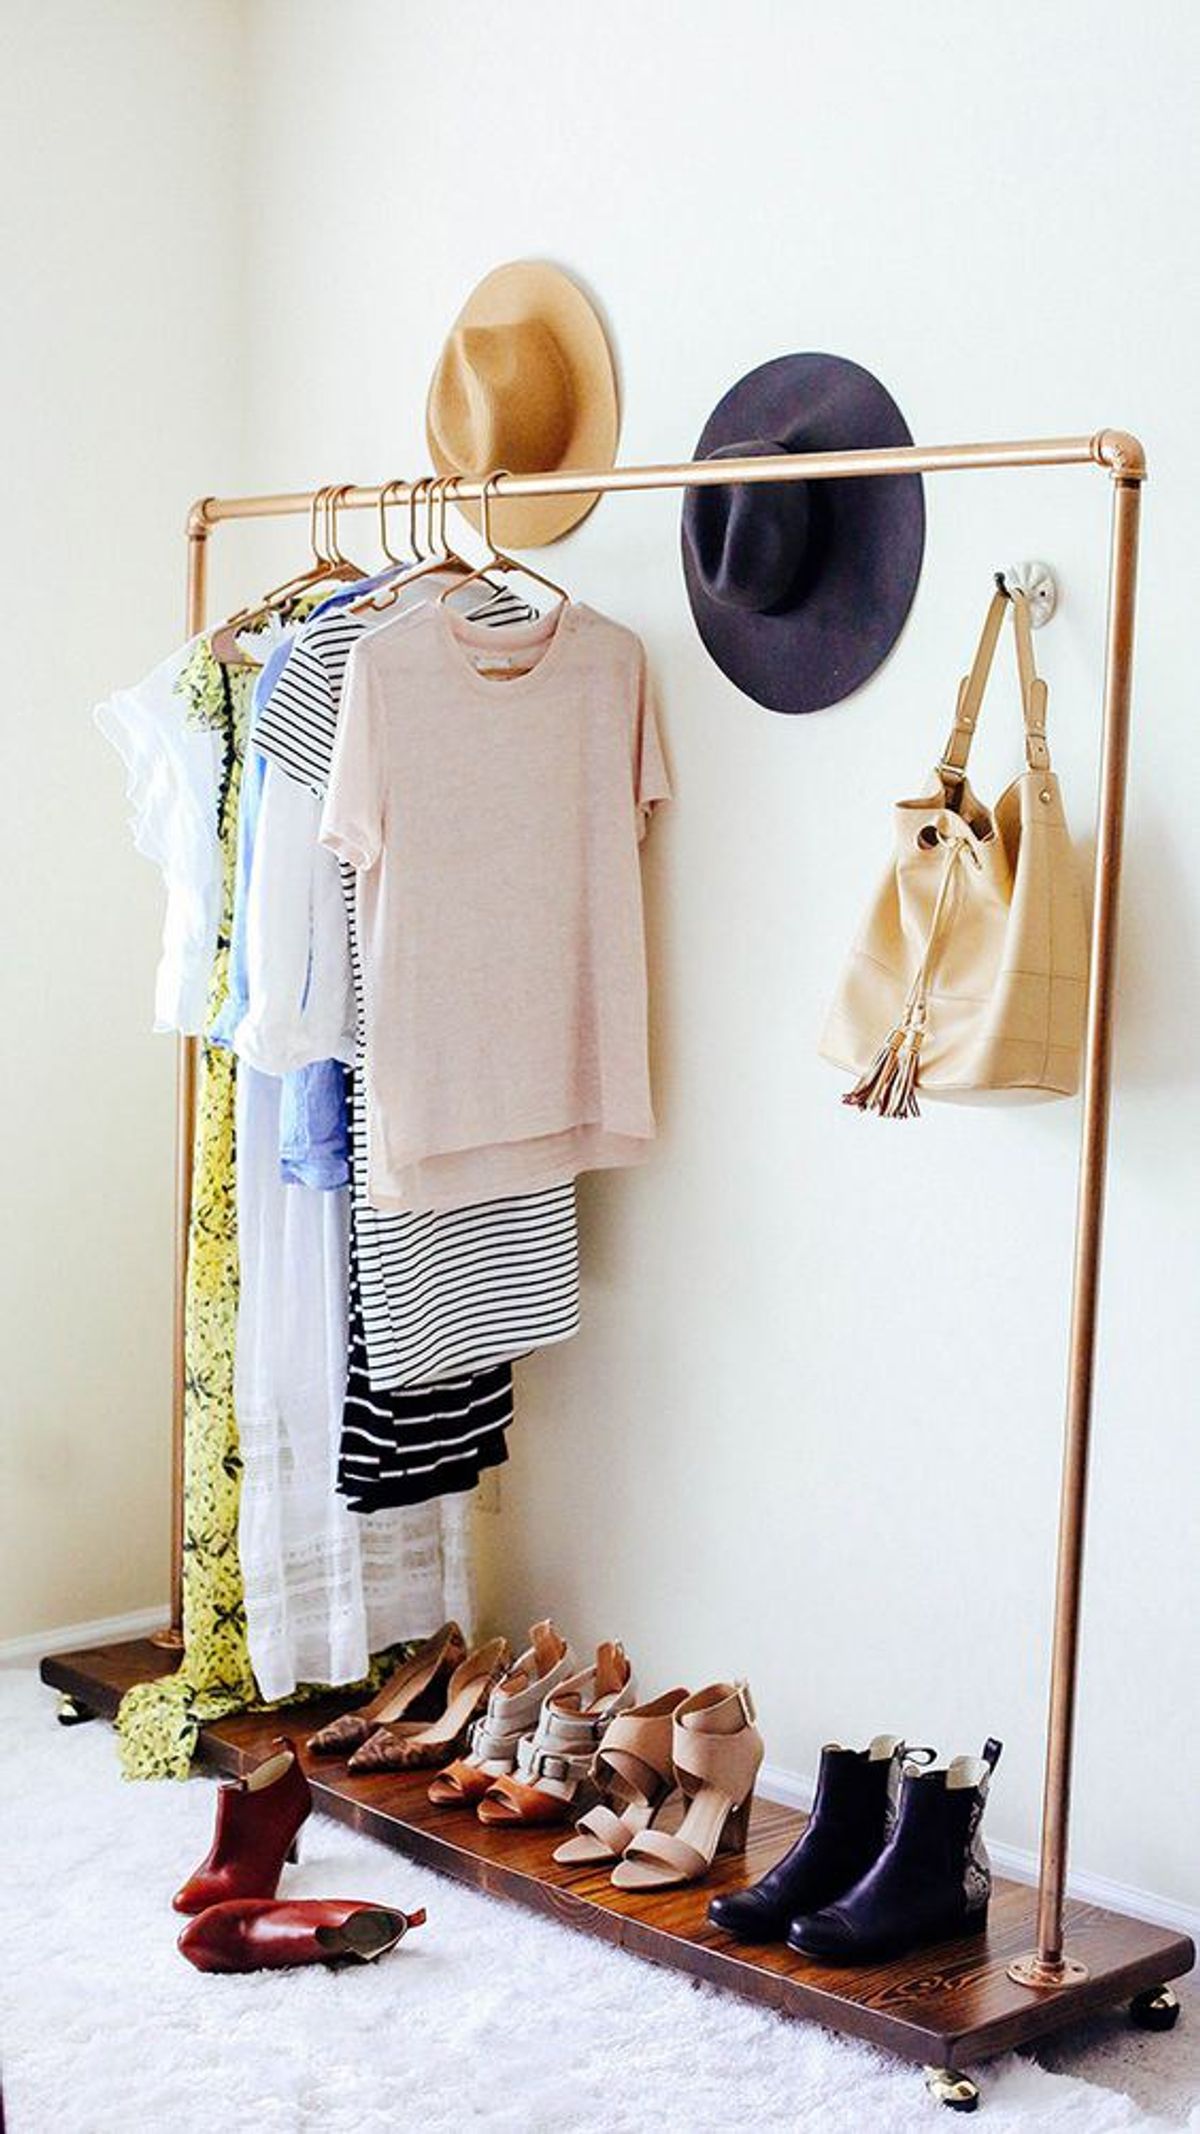 How To Shop Your Own Closet For New Summer Looks